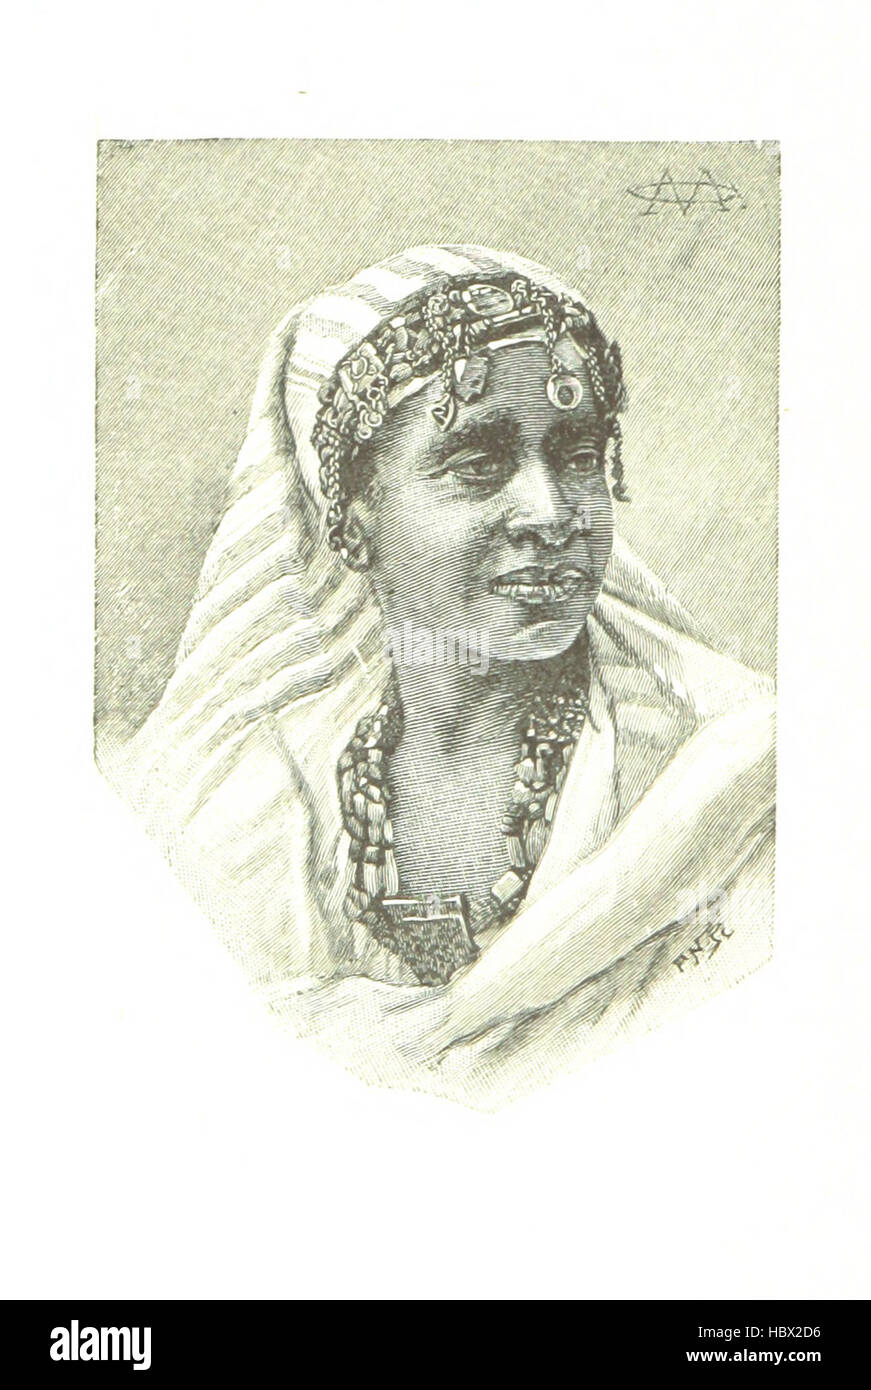 Image taken from page 316 of 'A travers le Maroc. Notes et croquis d'un artiste' Image taken from page 316 of 'A travers le Maroc Stock Photo